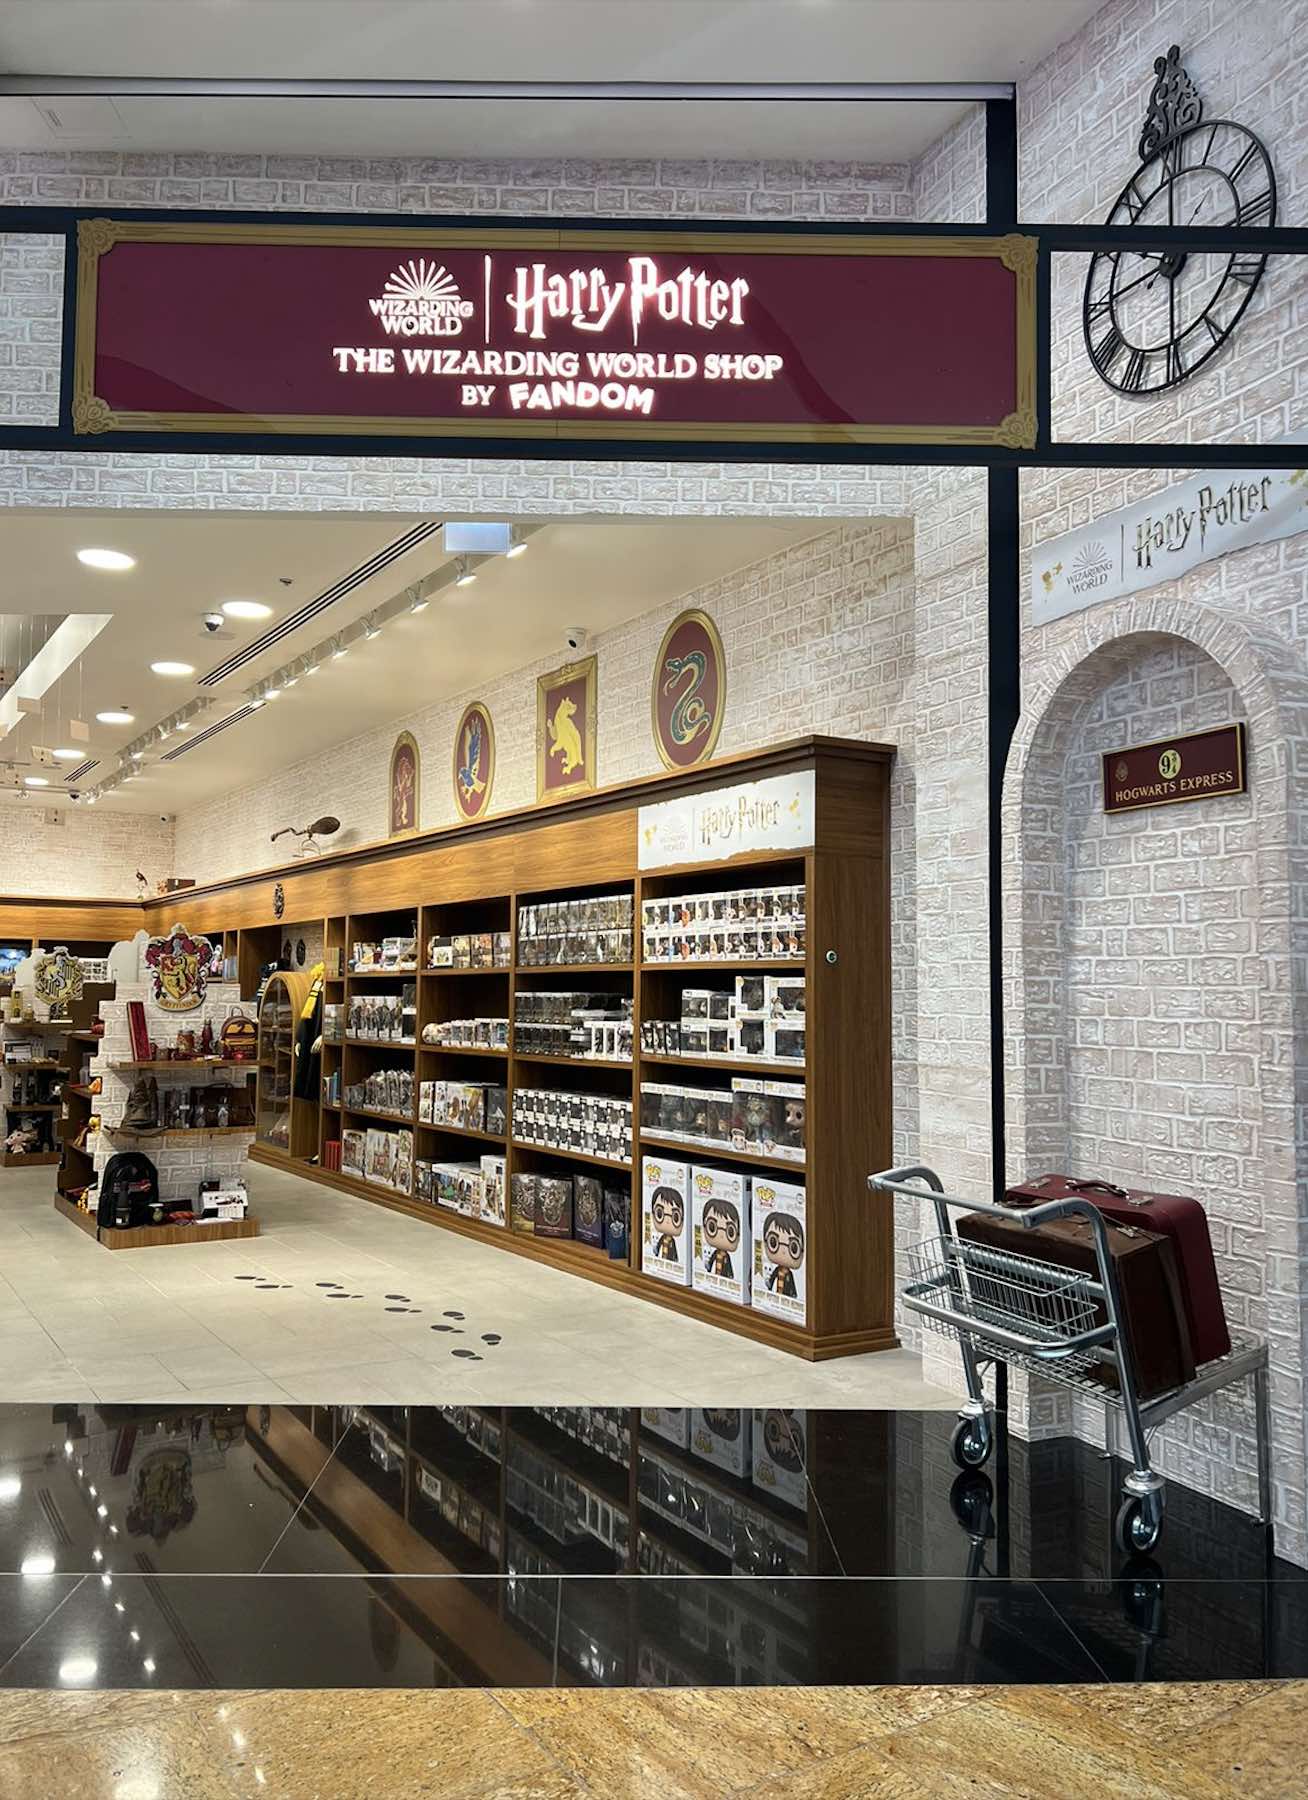 The Wizarding World Shop